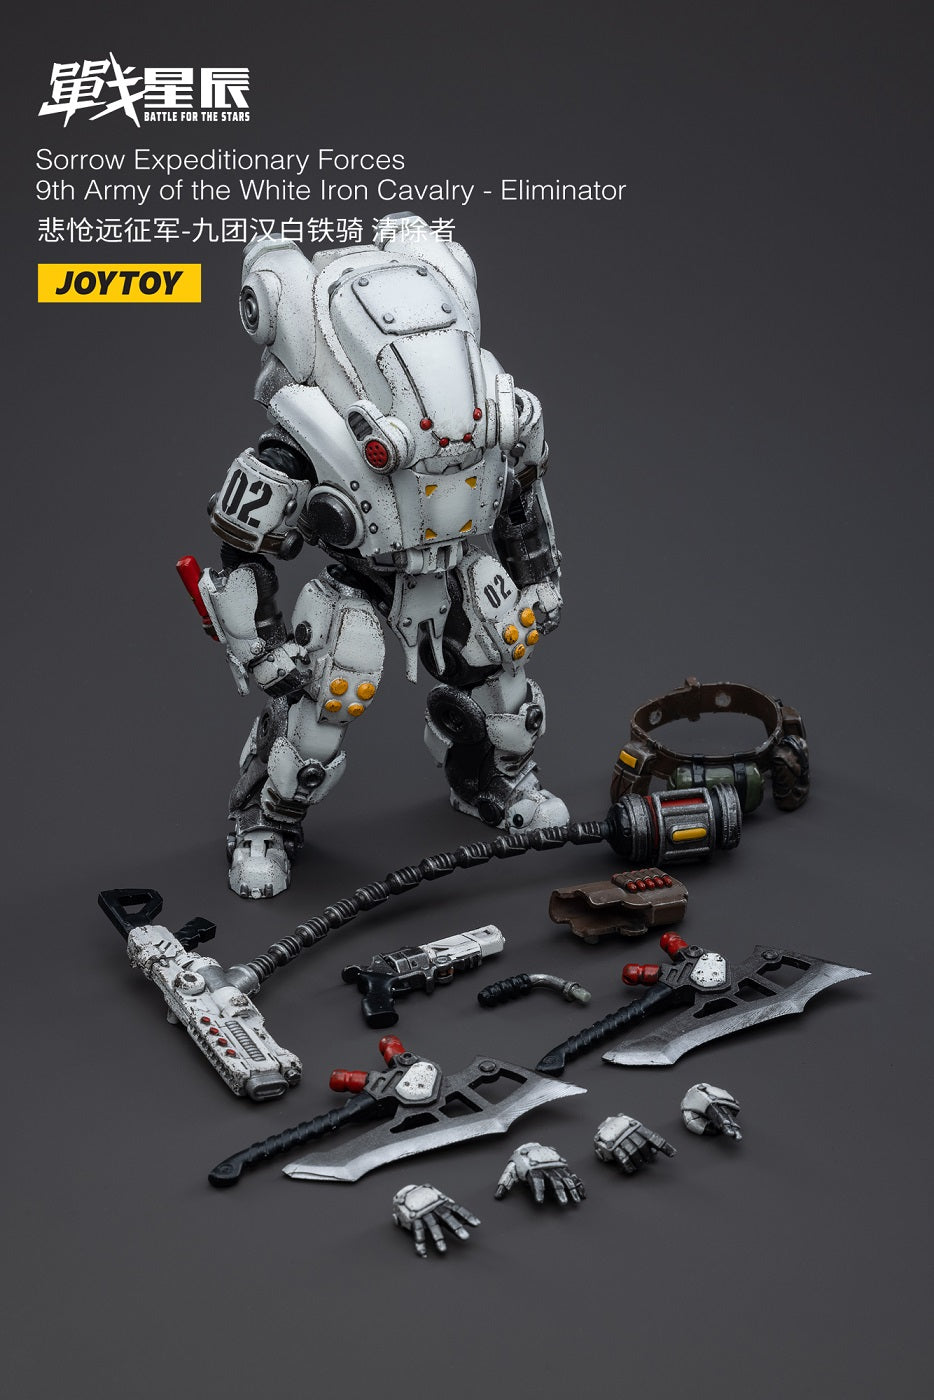 Sorrow Expeditionary Forces-9th Army of the white Iron - Action Figure By JOYTOYCavalry - Eliminator